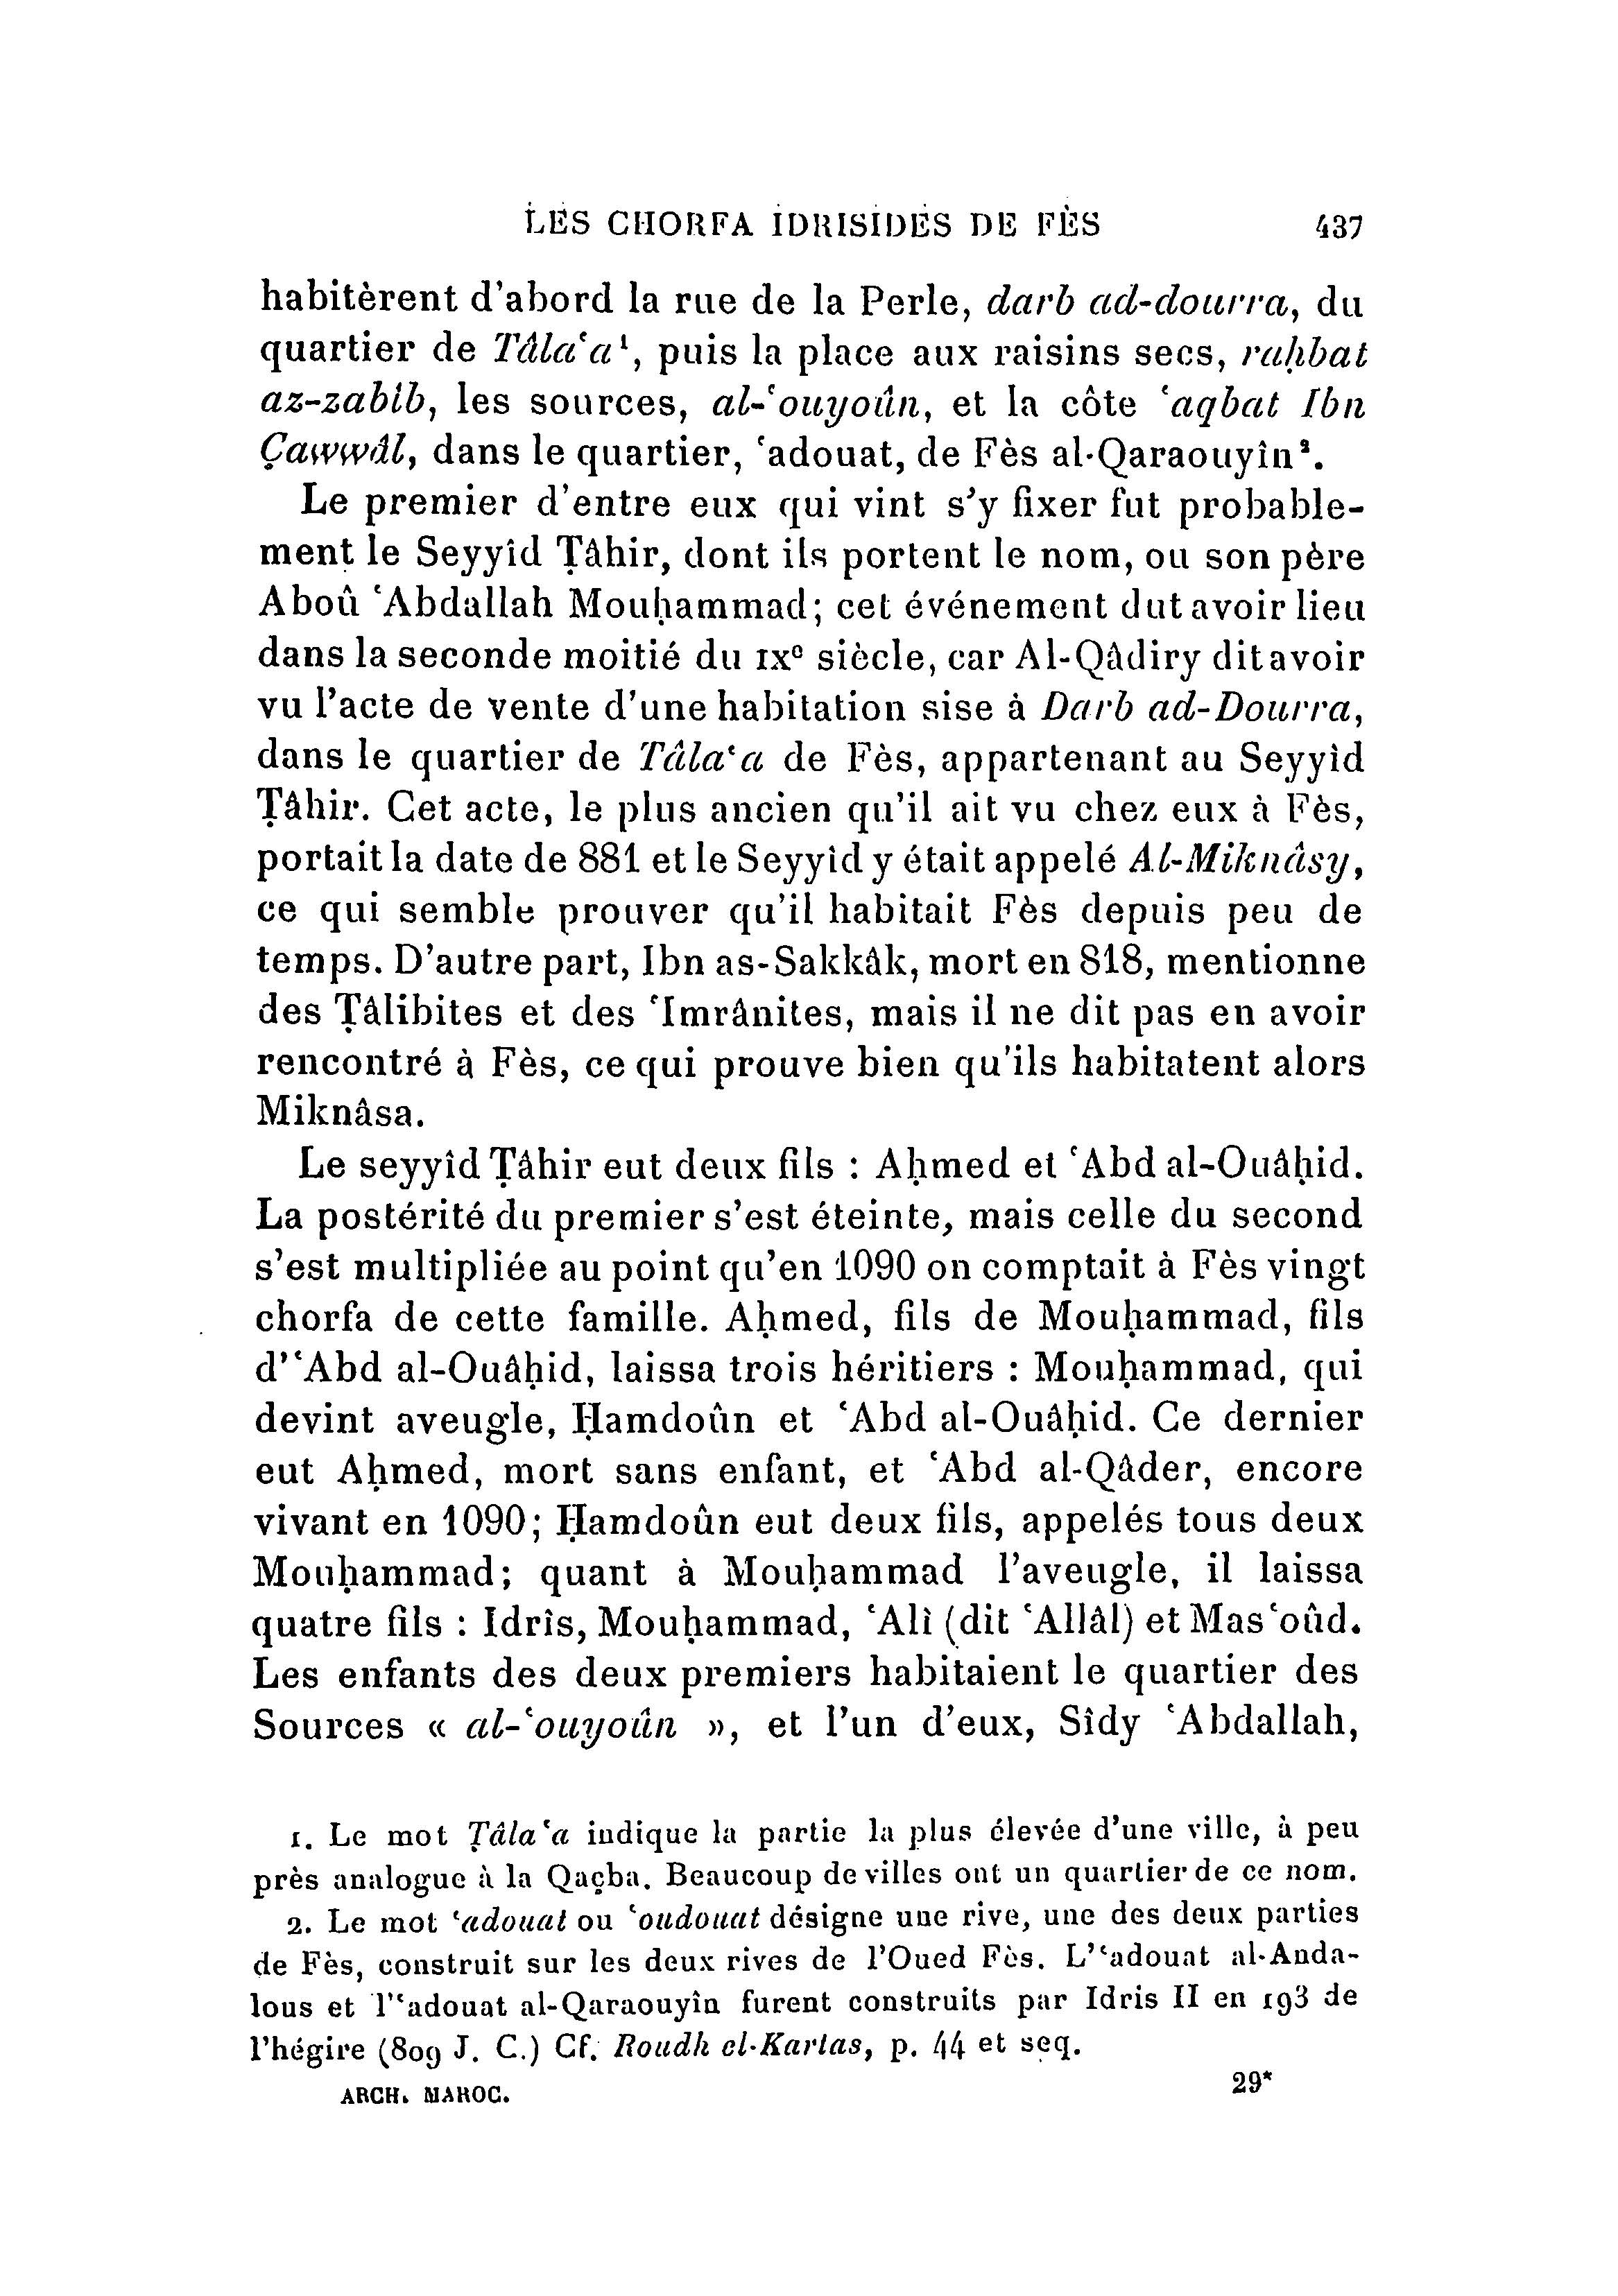 archives_marocaines-vol-1_page_449